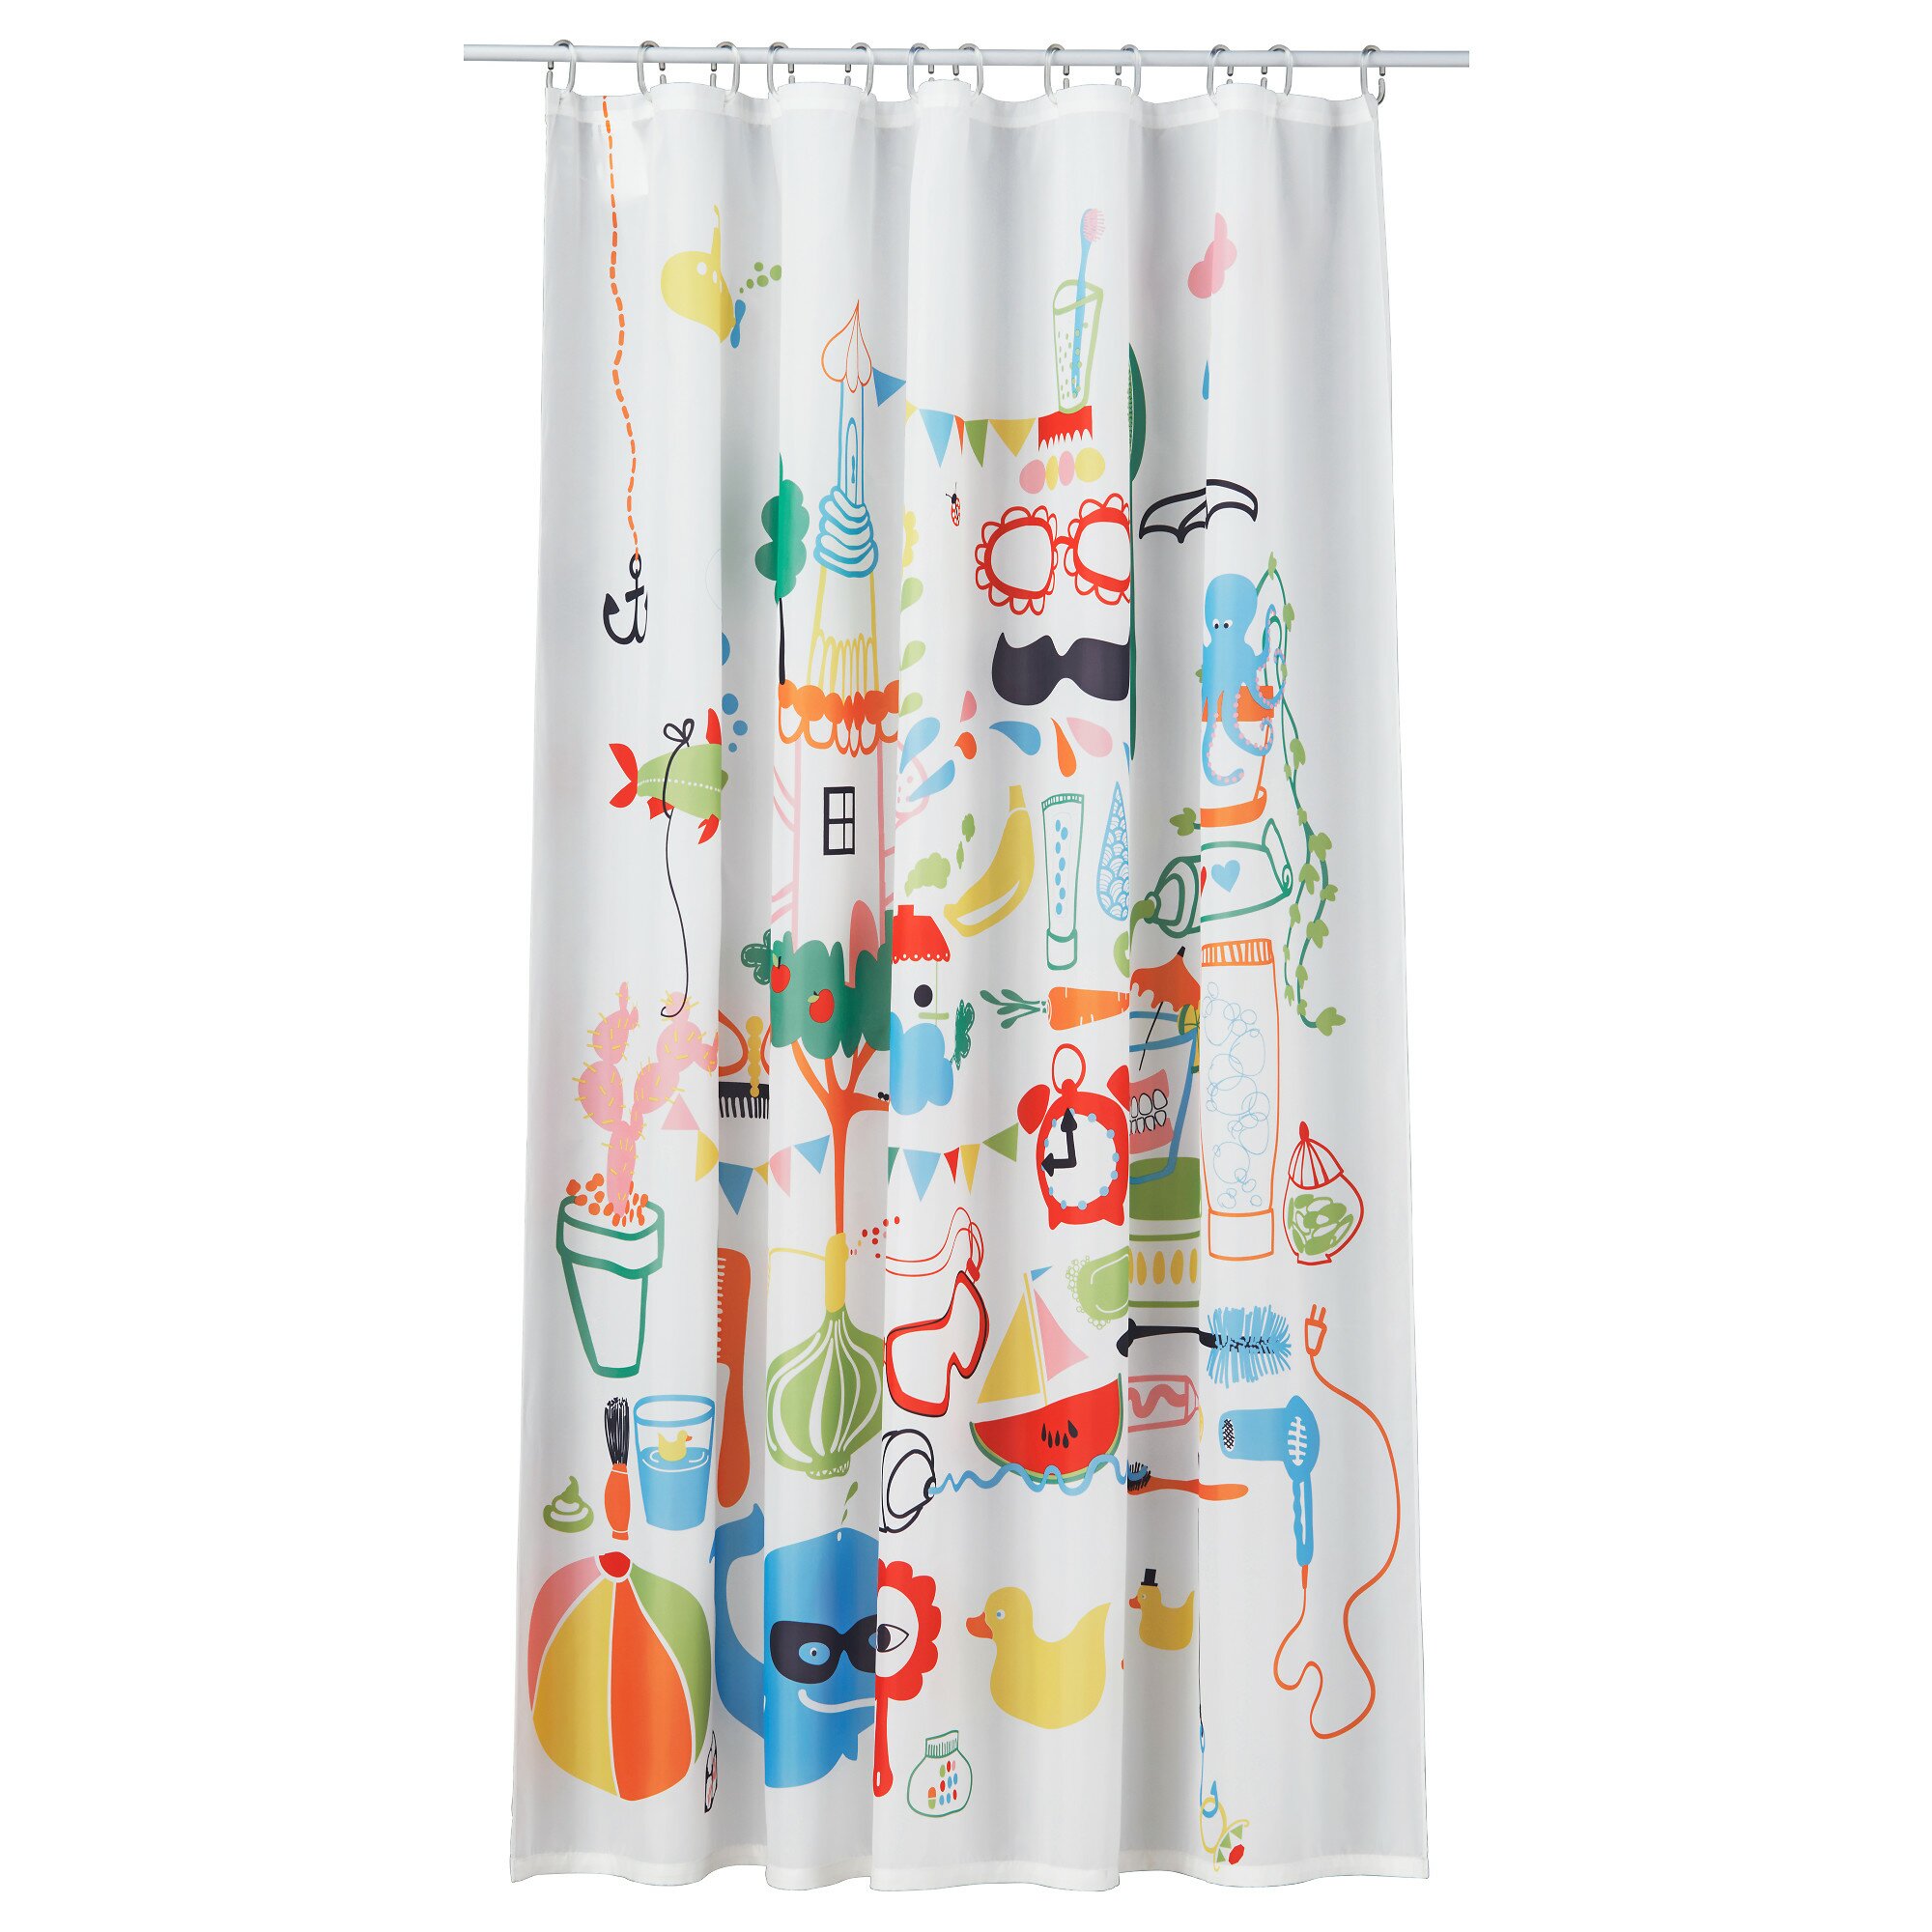 Ikea Shower Curtain for Best Your Bathroom Decoration: 84 Shower Curtain | Ikea Shower Curtain | Shower Curtain Liner